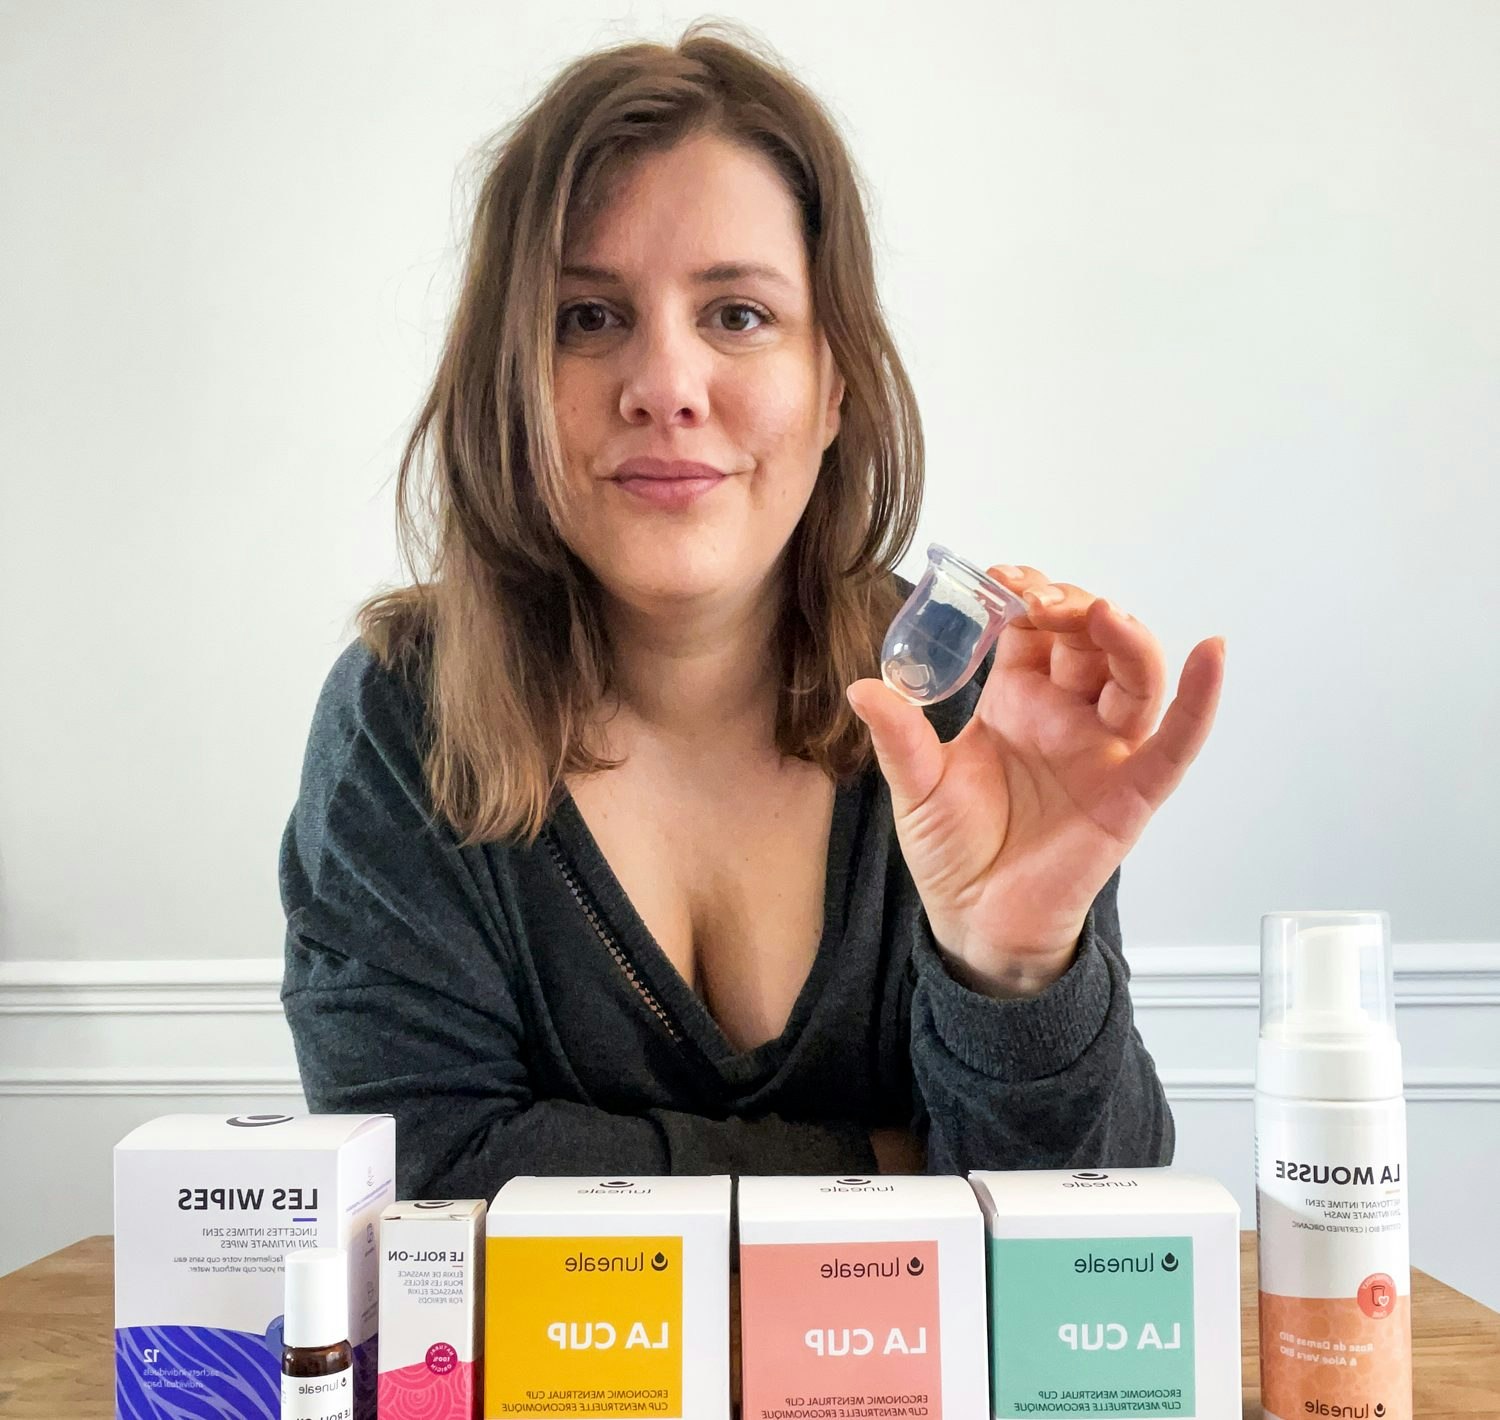 Leocadie Raymond, the founder of Luneale, with her products